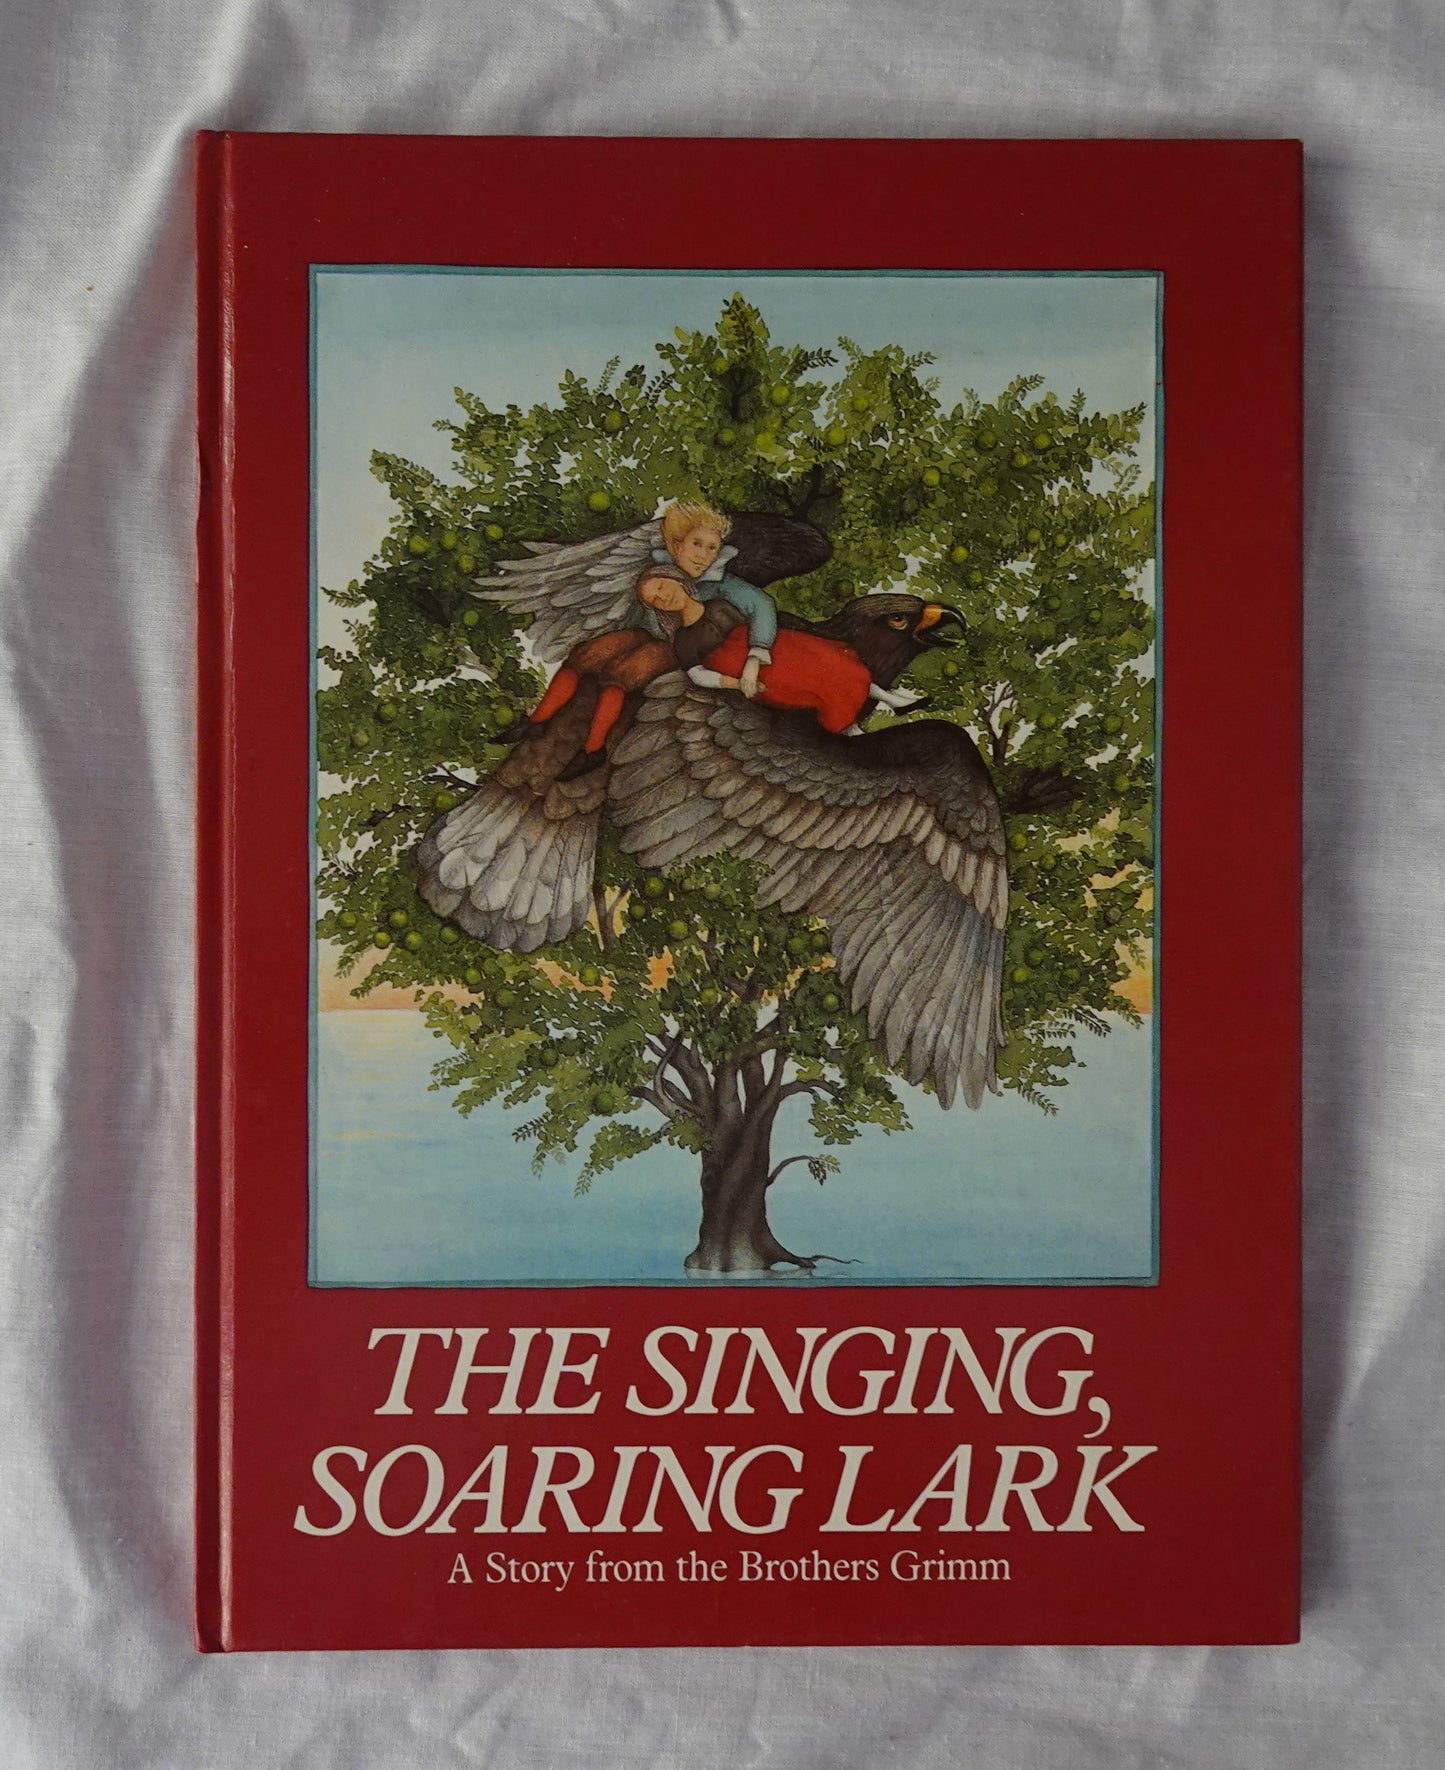 The Singing, Soaring Lark  A Story from the Brothers Grimm  by Renate Seelig